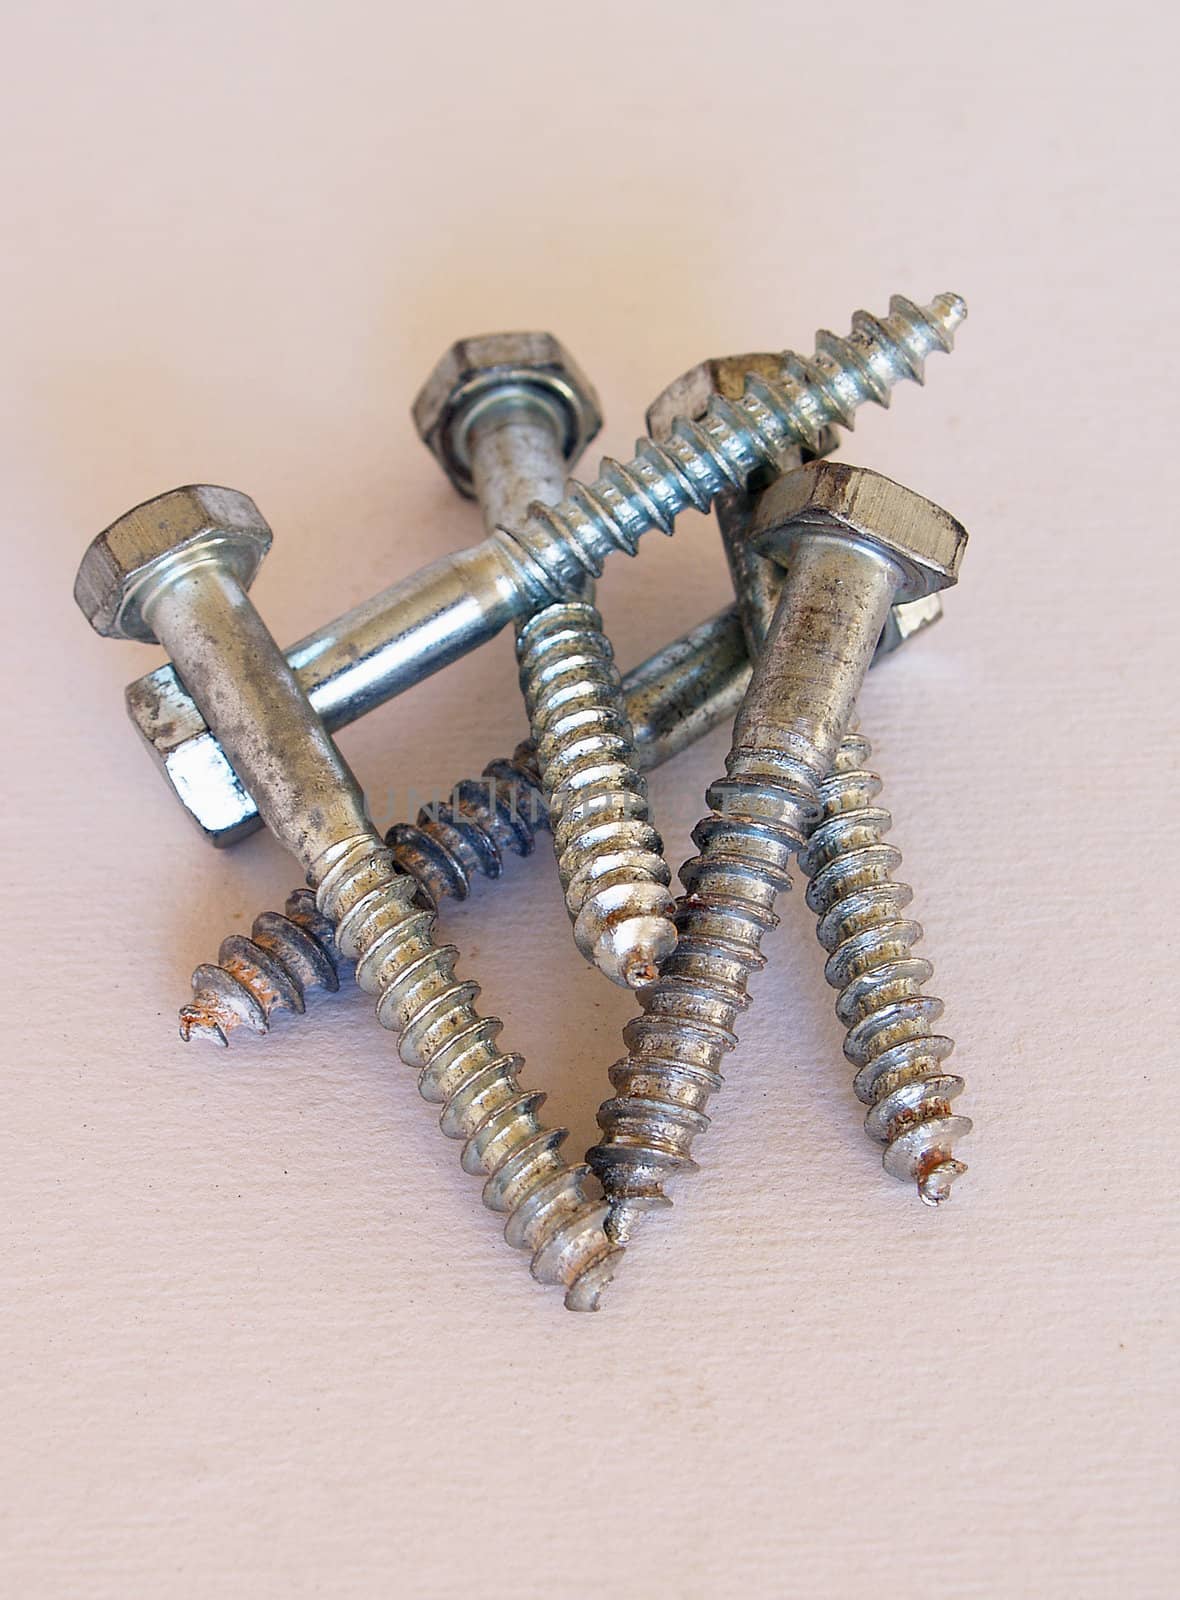 Screws by lauria